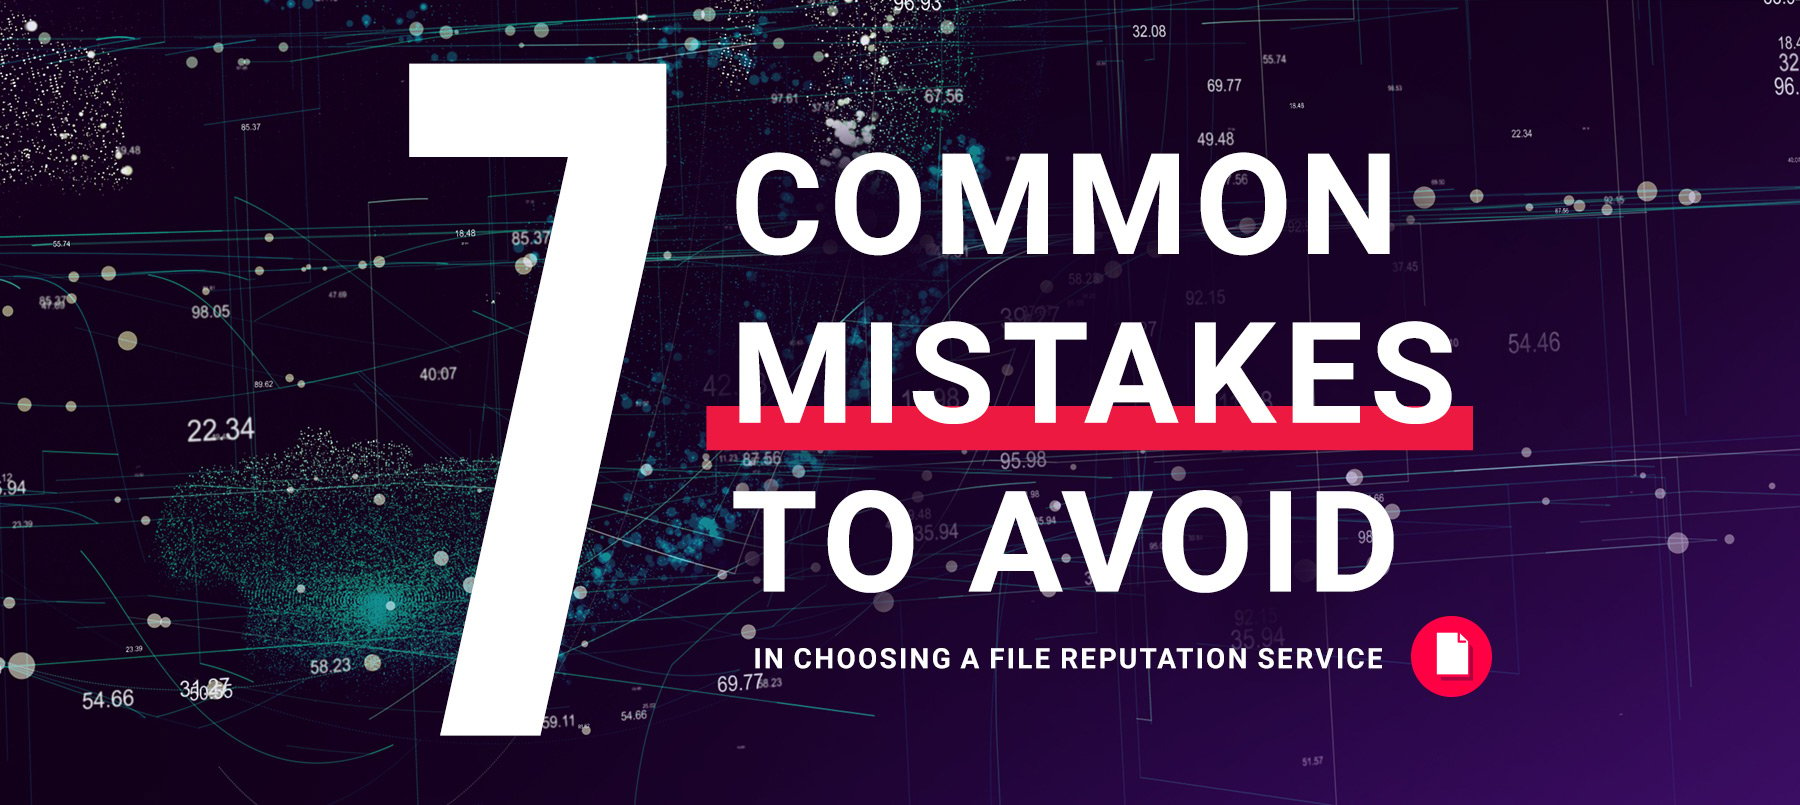 7 Common Mistakes to Avoid in Choosing a File Reputation Service